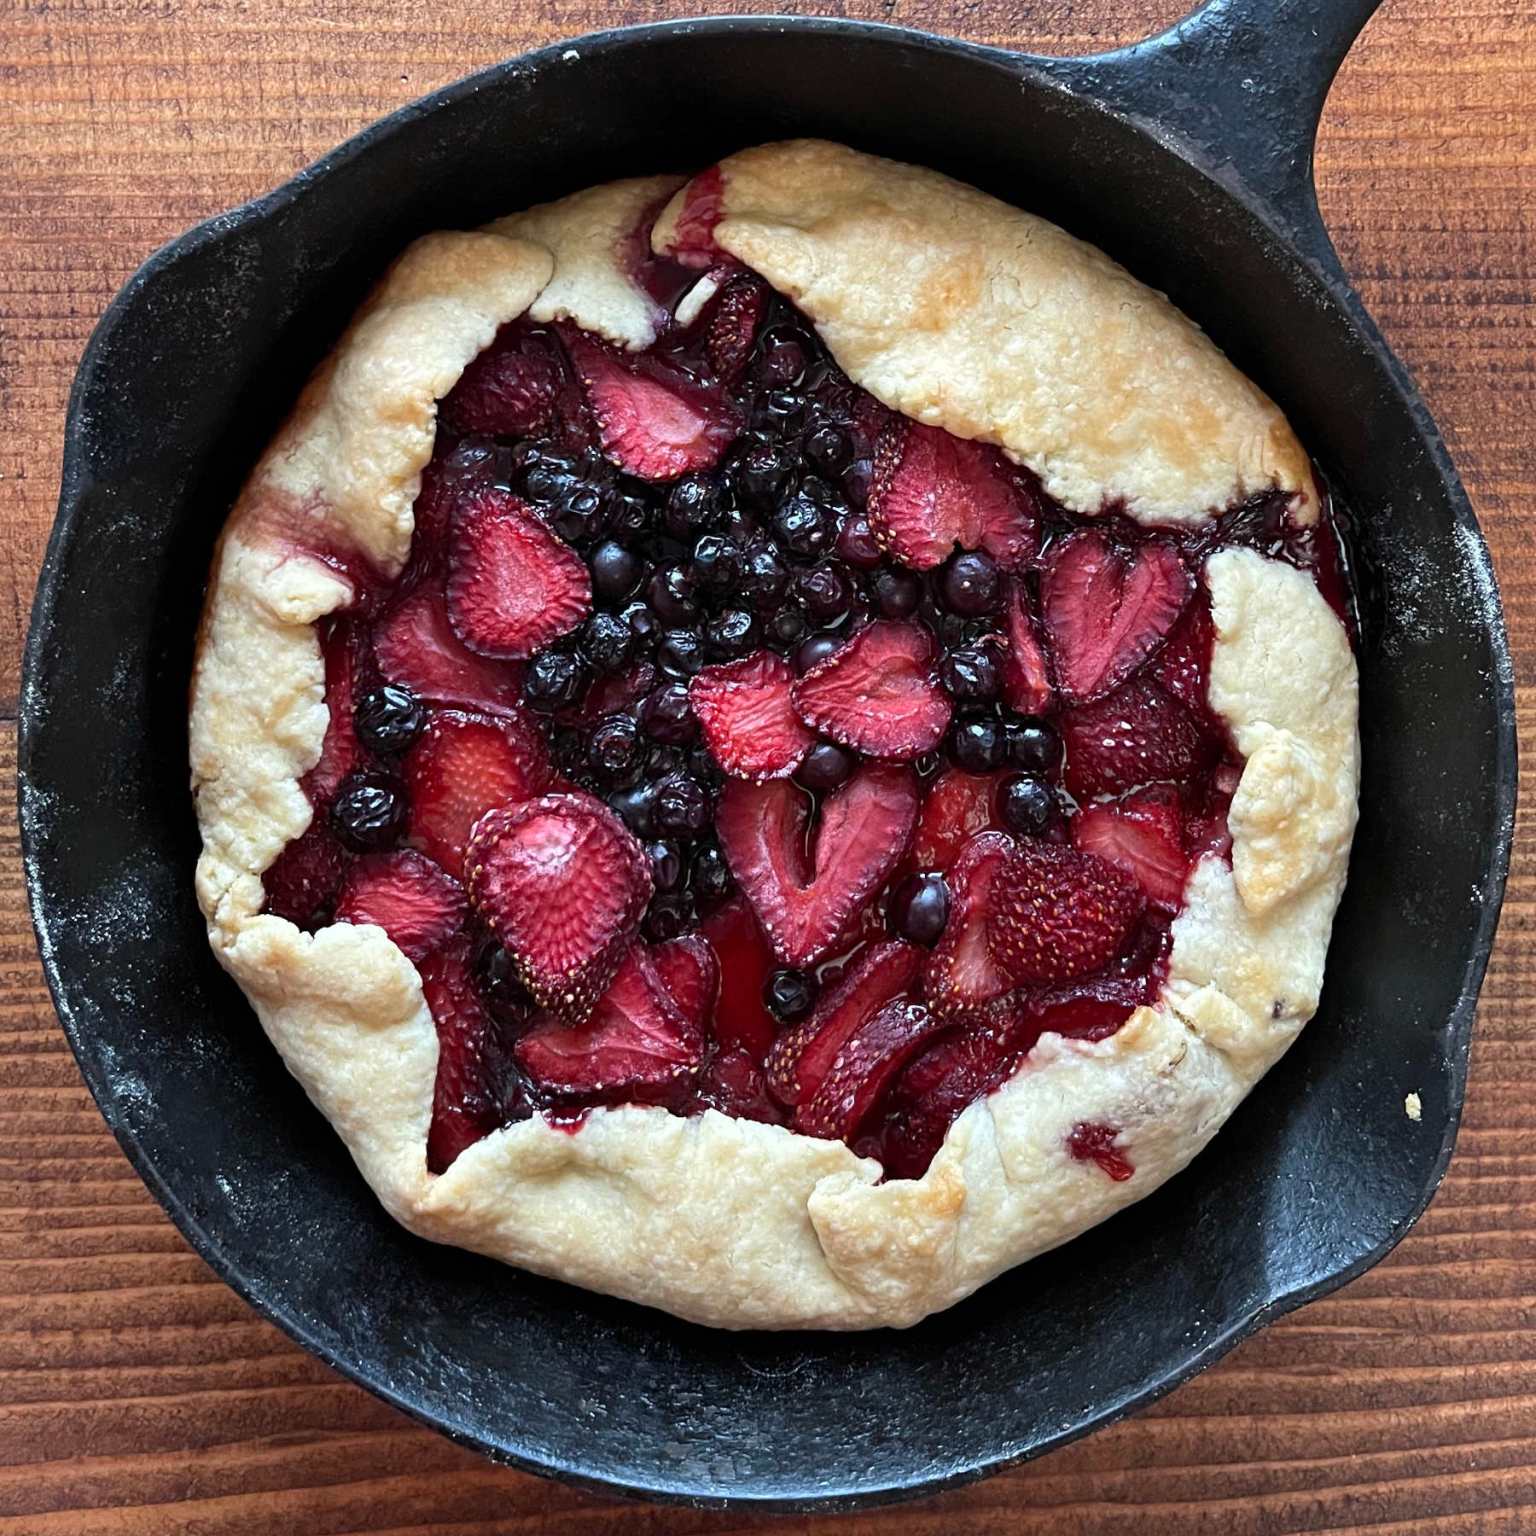 A strawberry blueberry galette baked in a cast iron pan sits on a wooden background